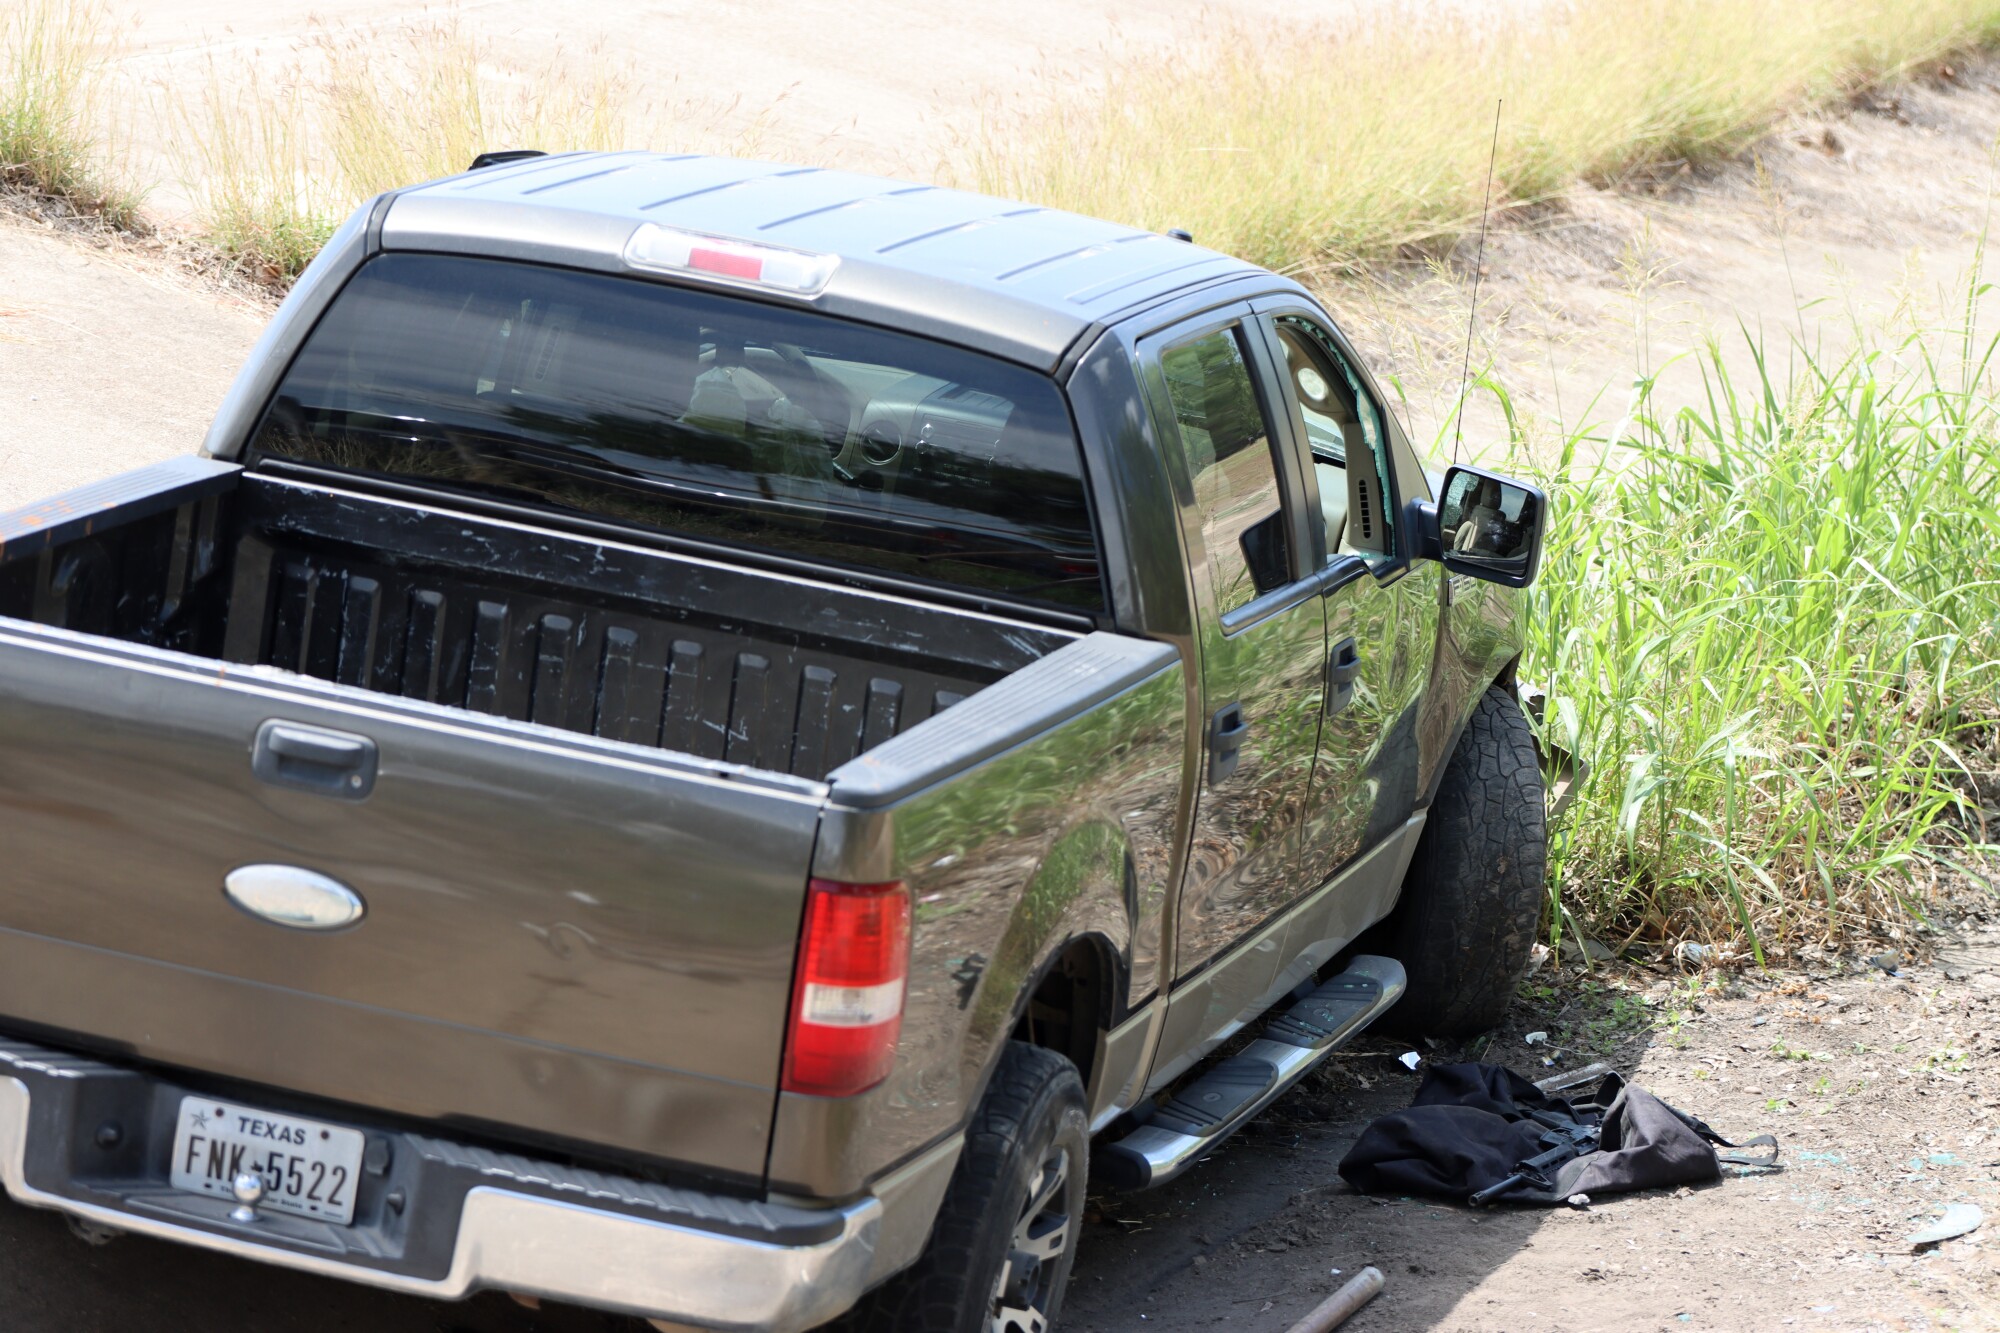 A weapon lays next to the shooters crashed truck near the school site in Uvalde, Texas.